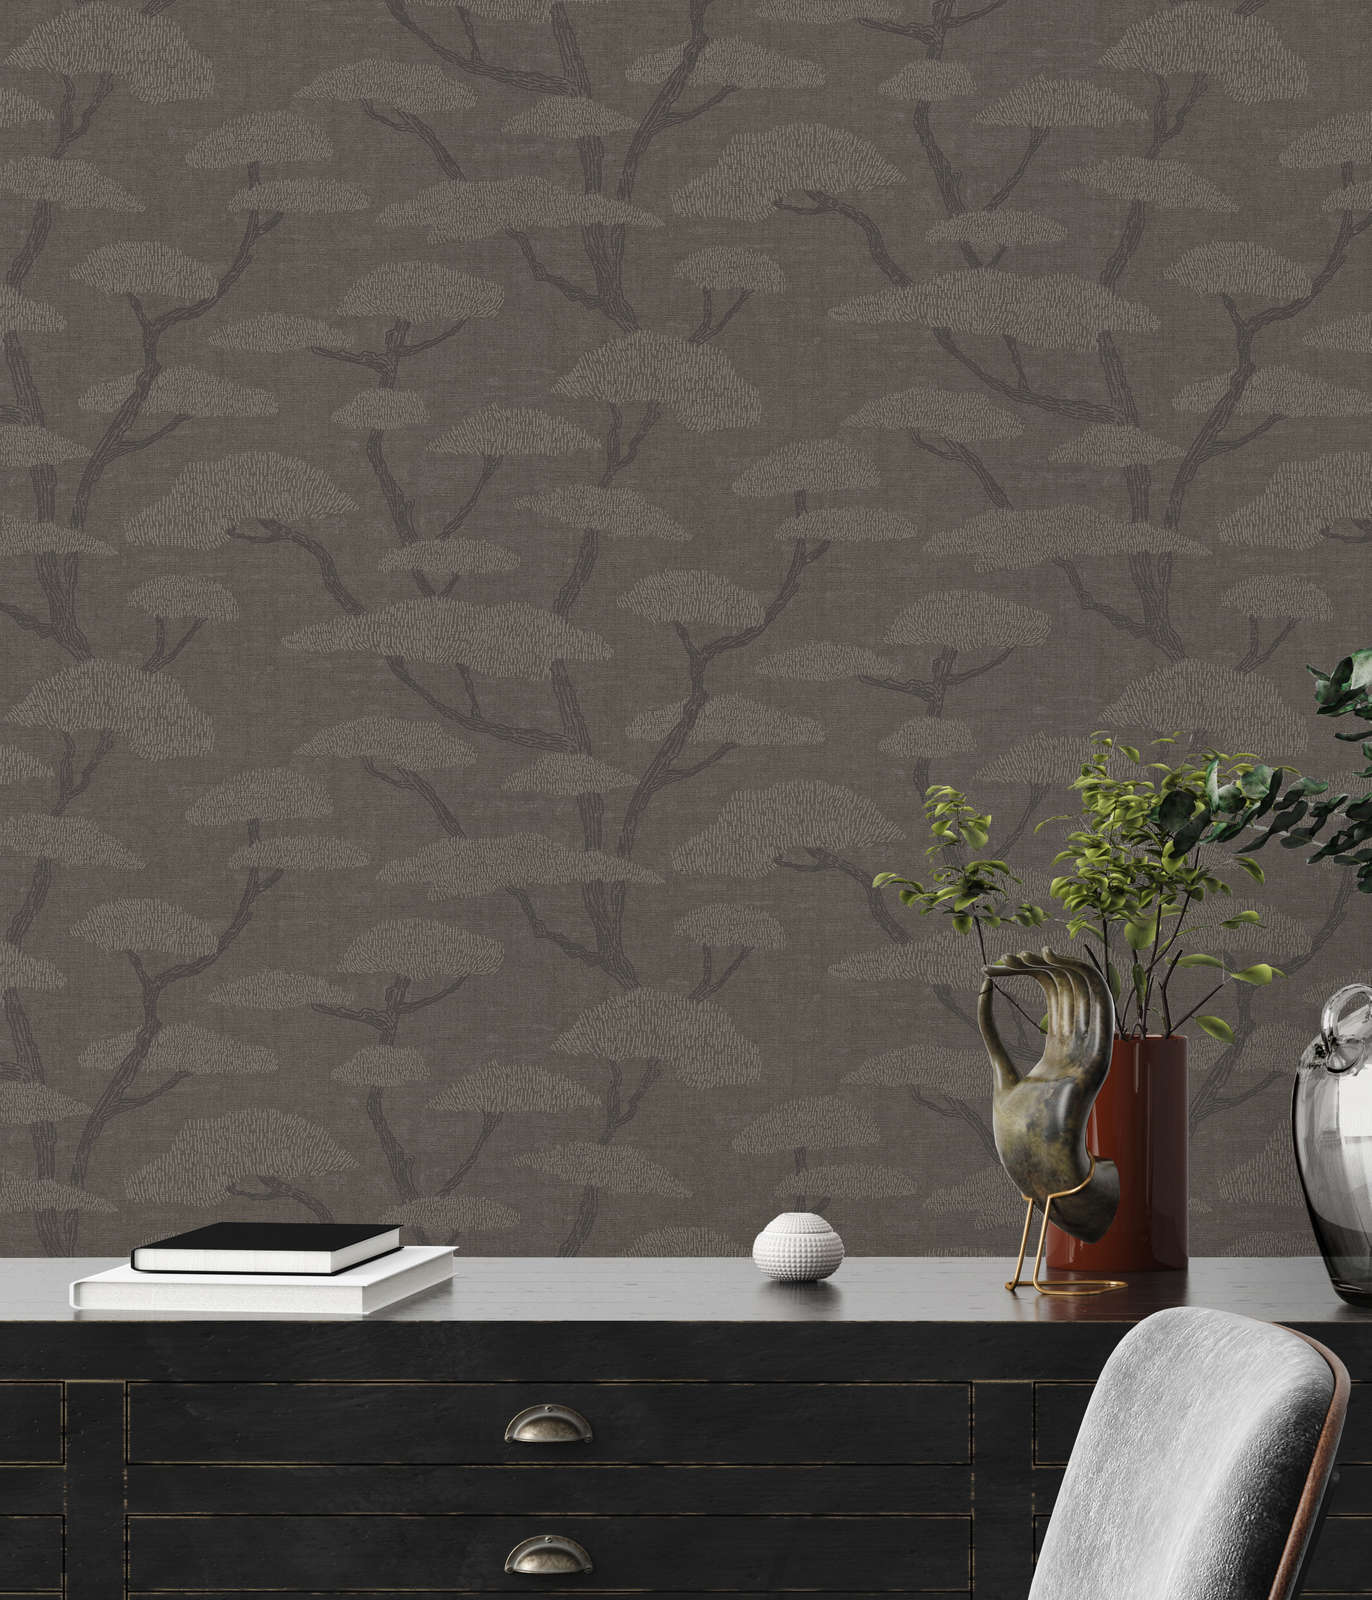             Anthracite wallpaper with tree motif in vintage style
        